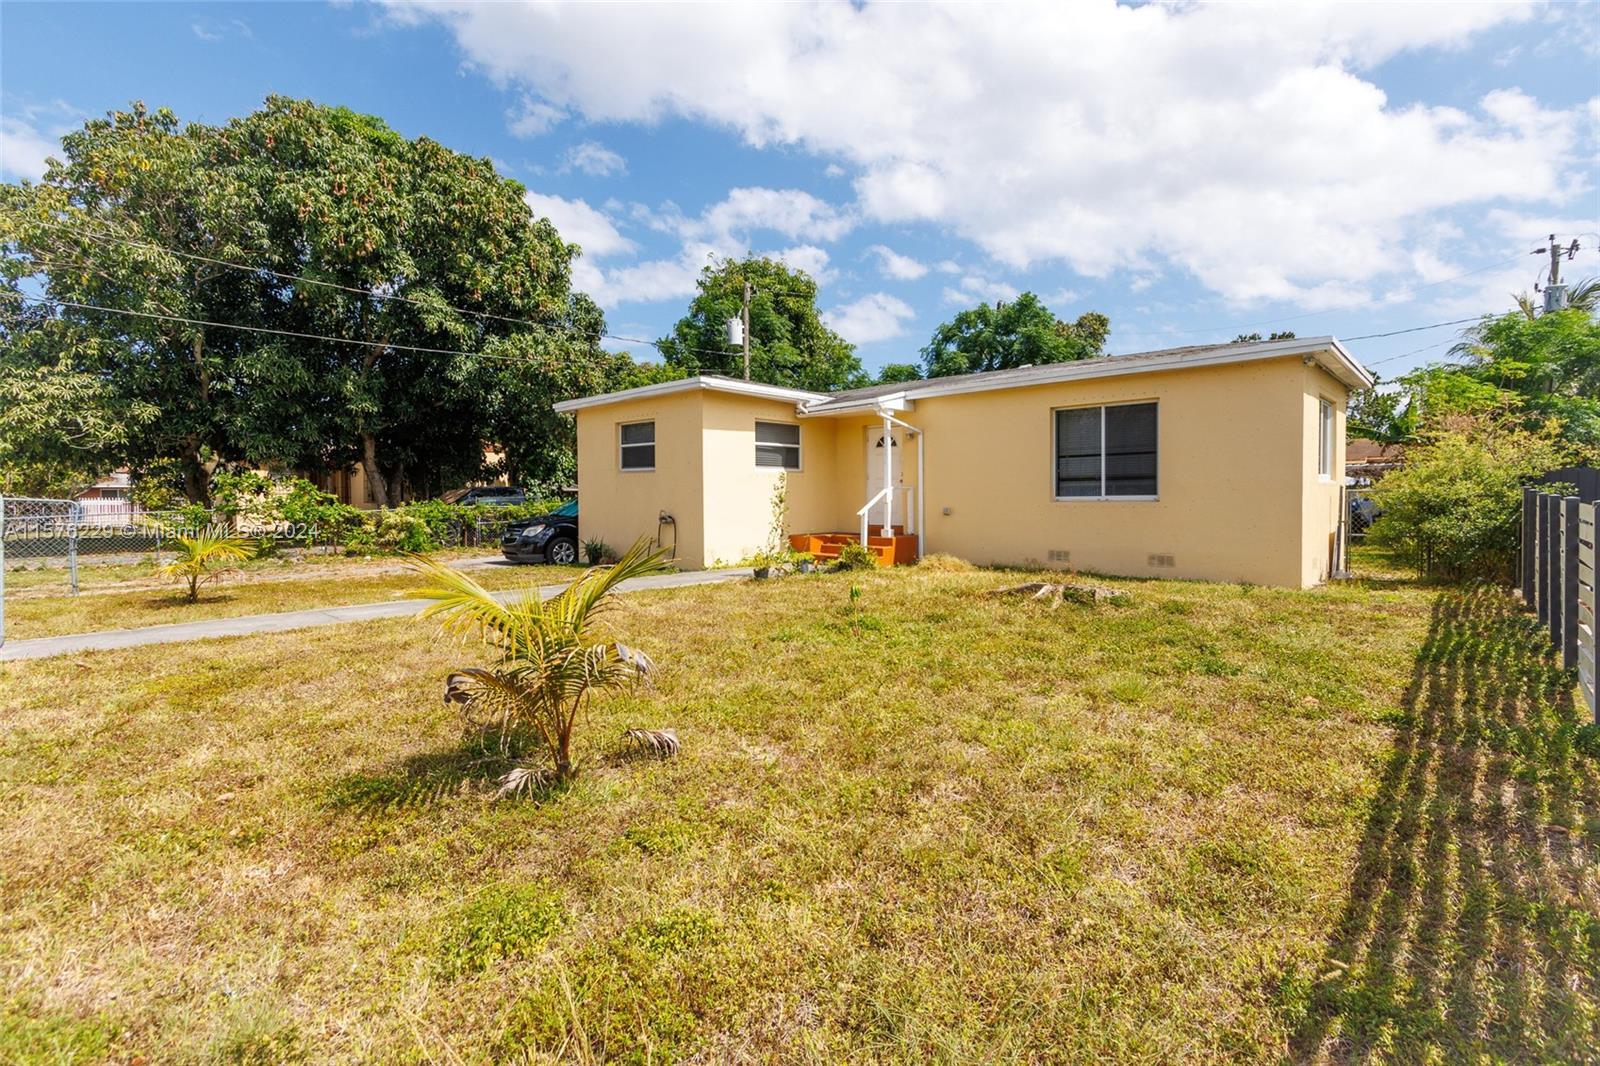 Don't miss out! Come by today to check out this Miami property! Situated in a thriving area full of 